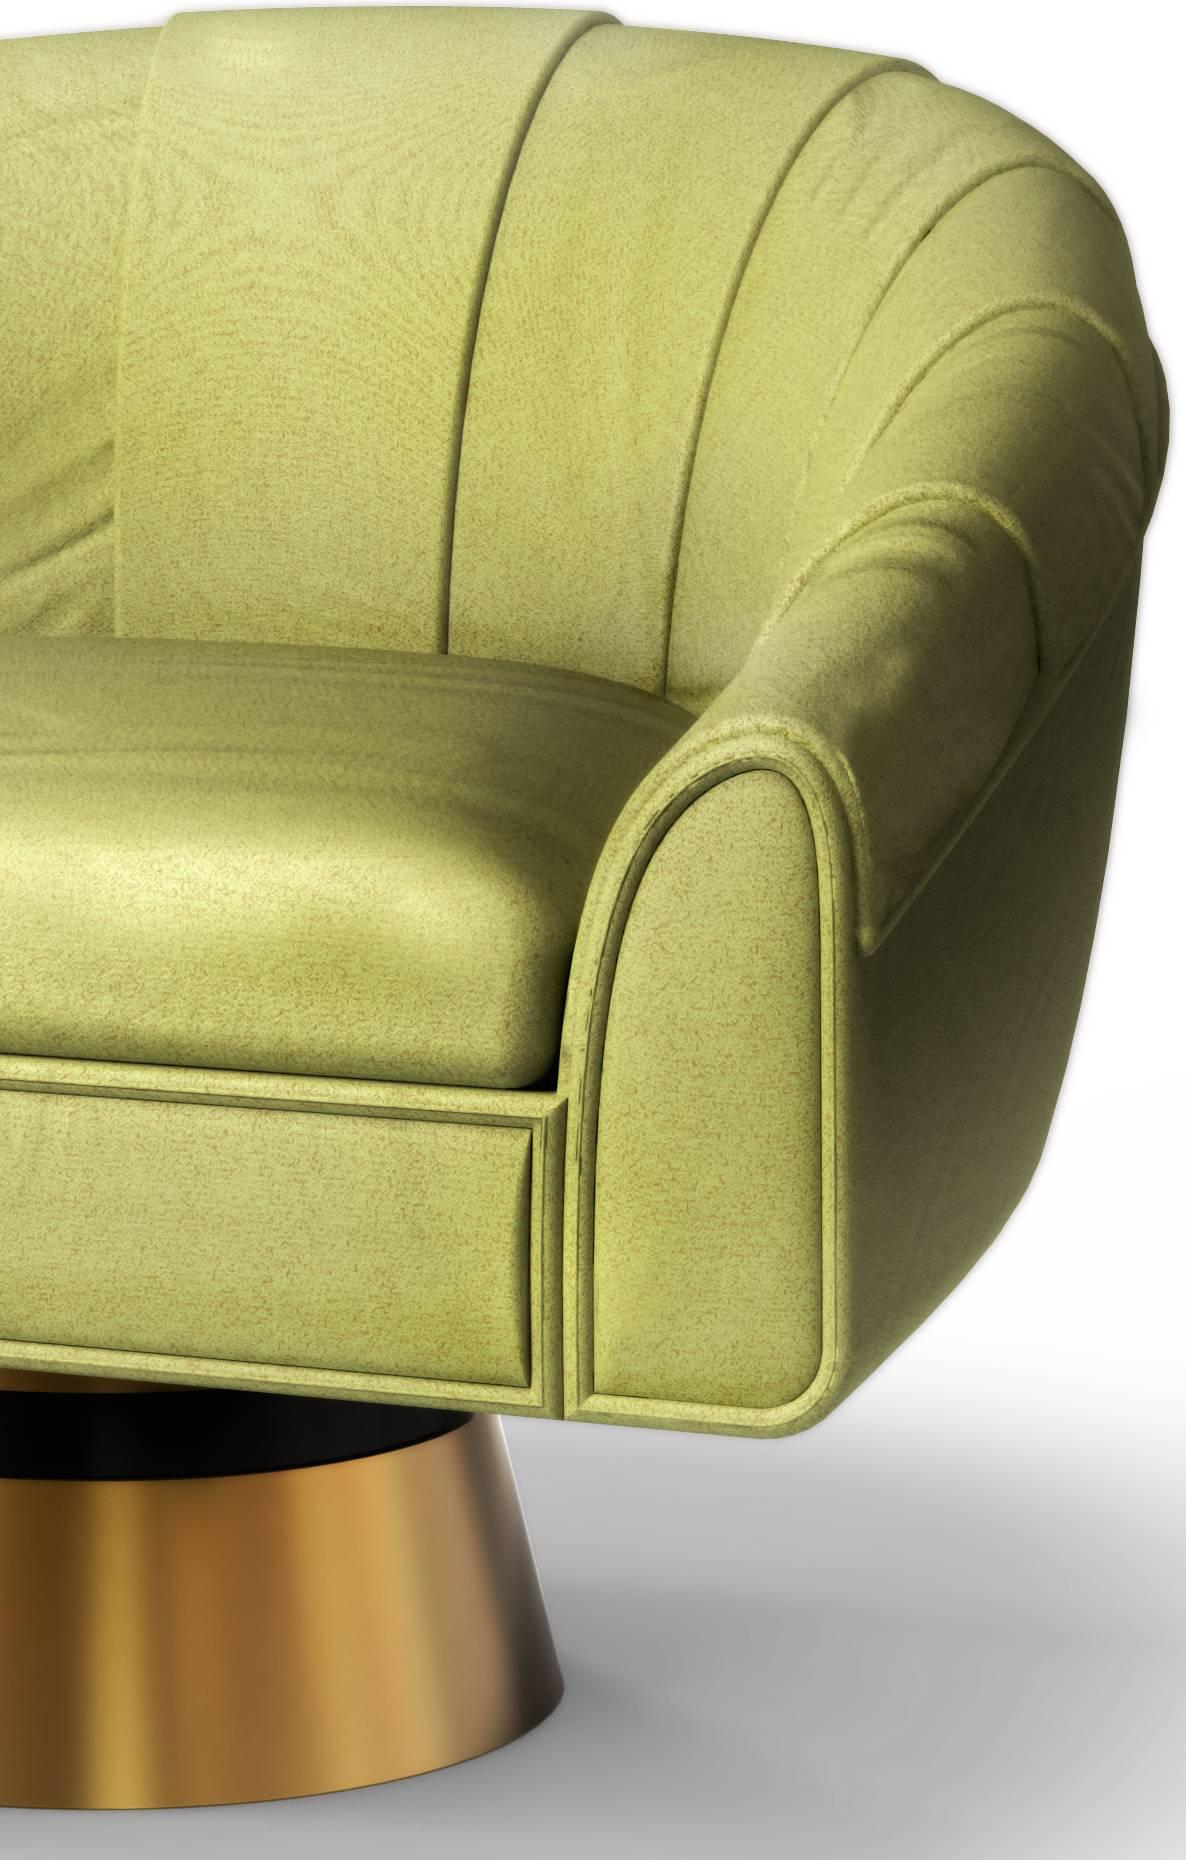 As you sit in this armchair, you are immediately taken to a more relaxed way of living. The soft neutral green color of the chair, very popular in the 1960s, gives it a modern and lighter touch. To contrast, the polished brass base of this chair